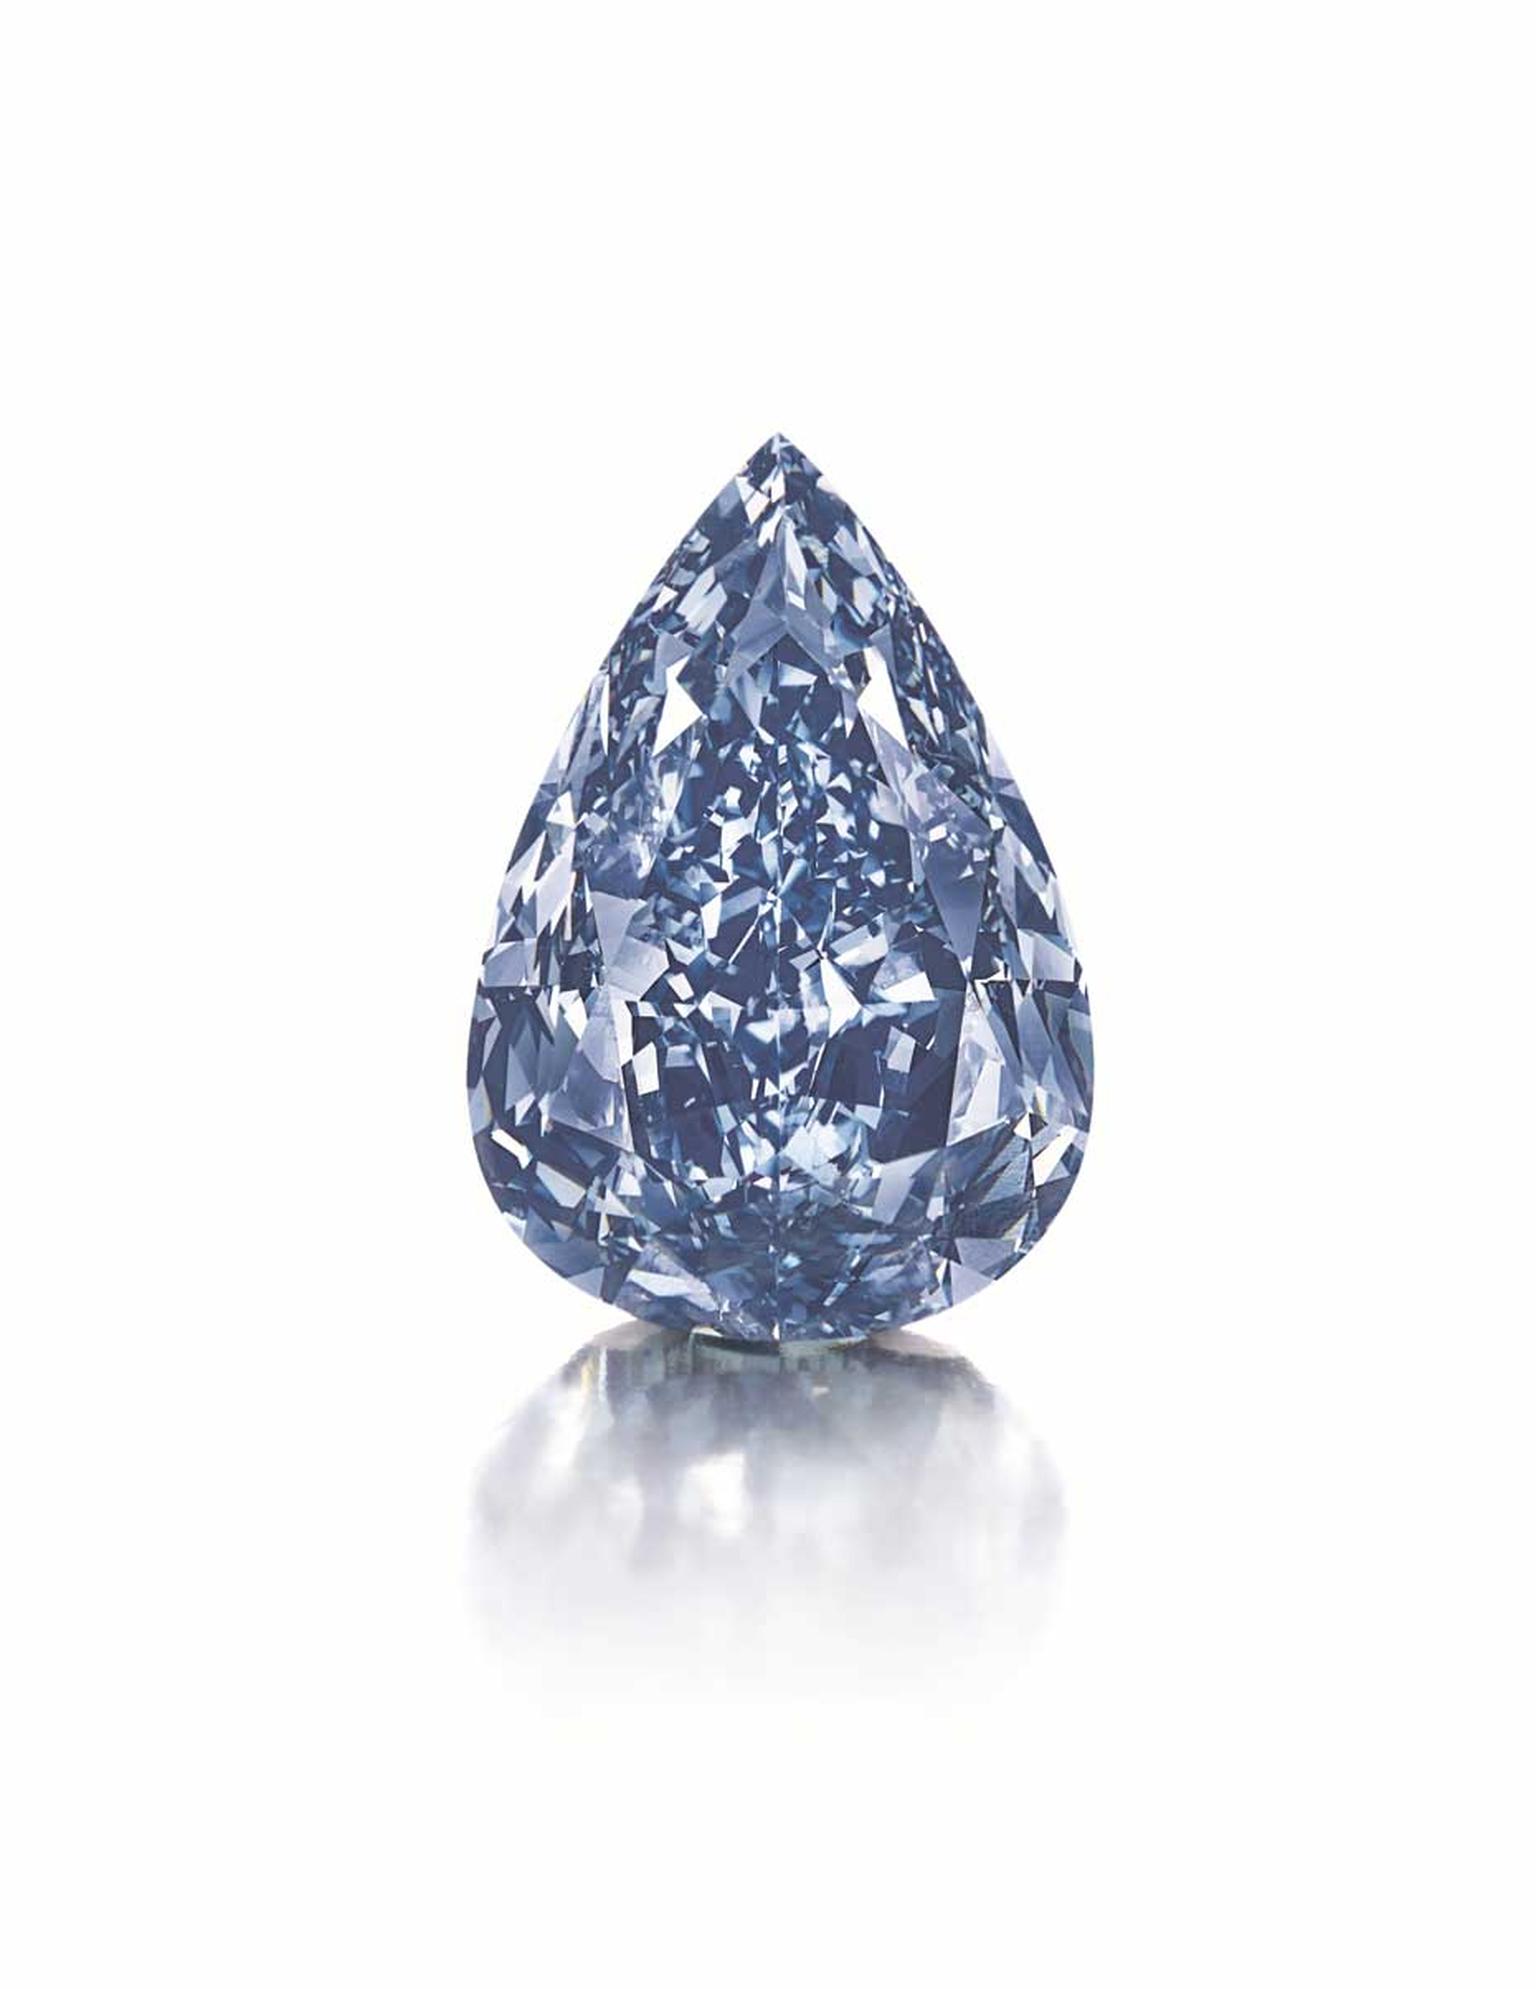 Weighing in at 13.22ct, the flawless, Fancy Vivid Winston Blue diamond fetched a staggering $1.79m per carat.